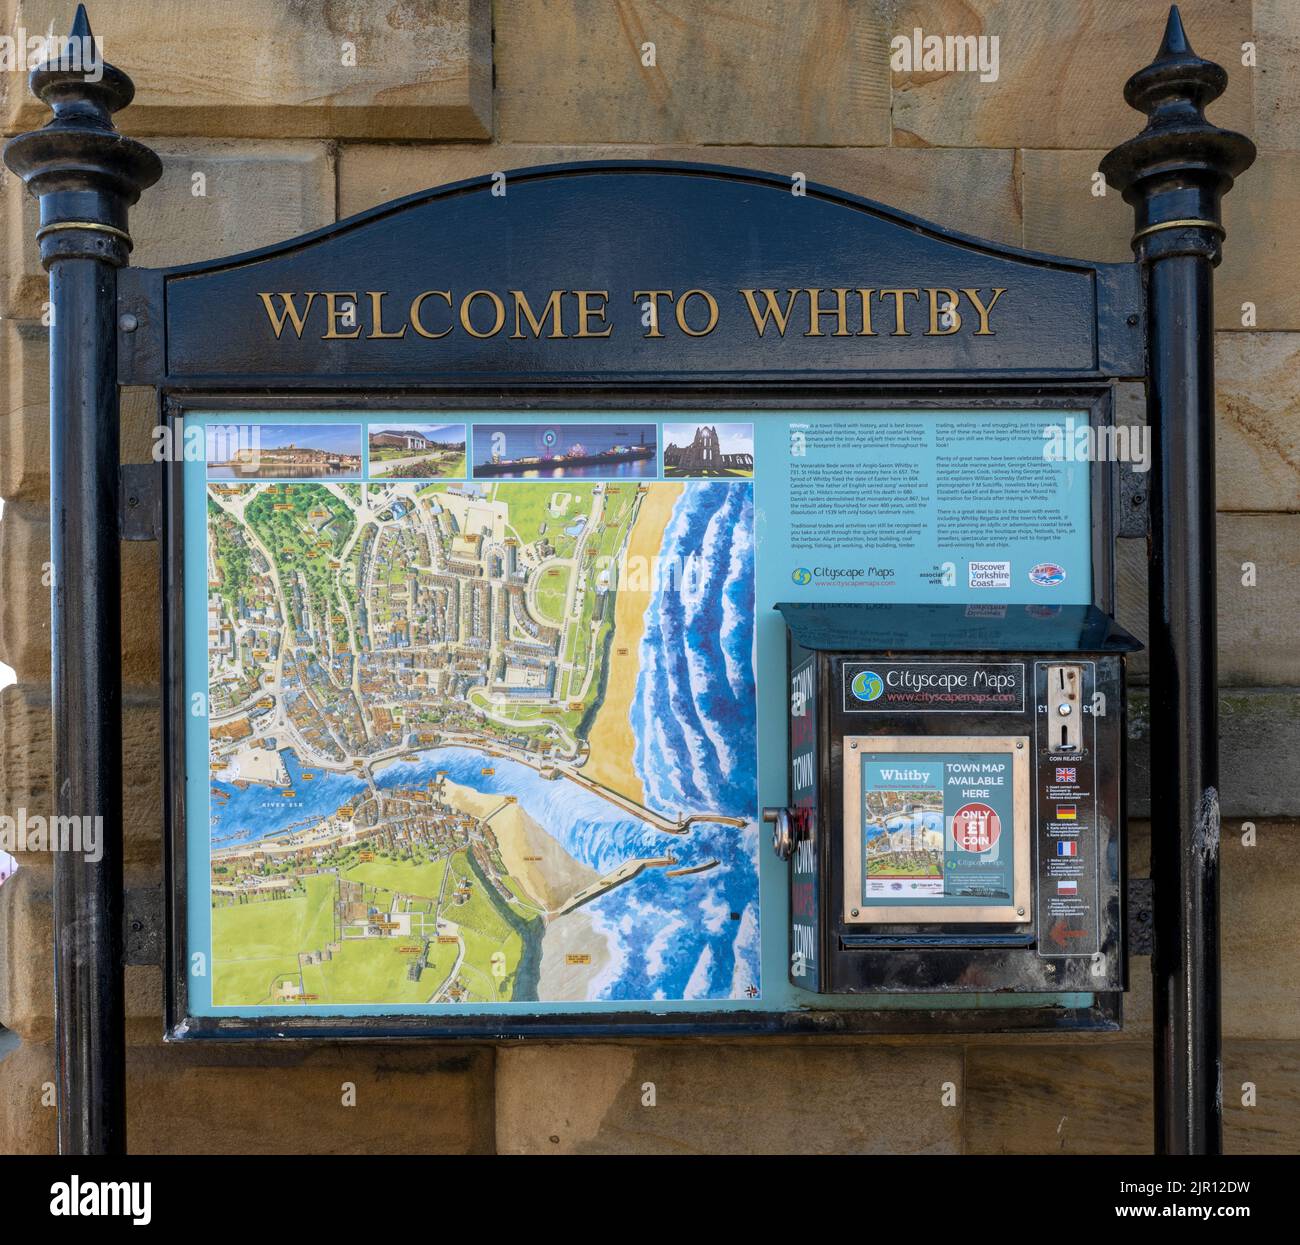 Welcome to Whitby tourist information board, Whitby, North Yorkshire, Yorkshire, England, UK Stock Photo